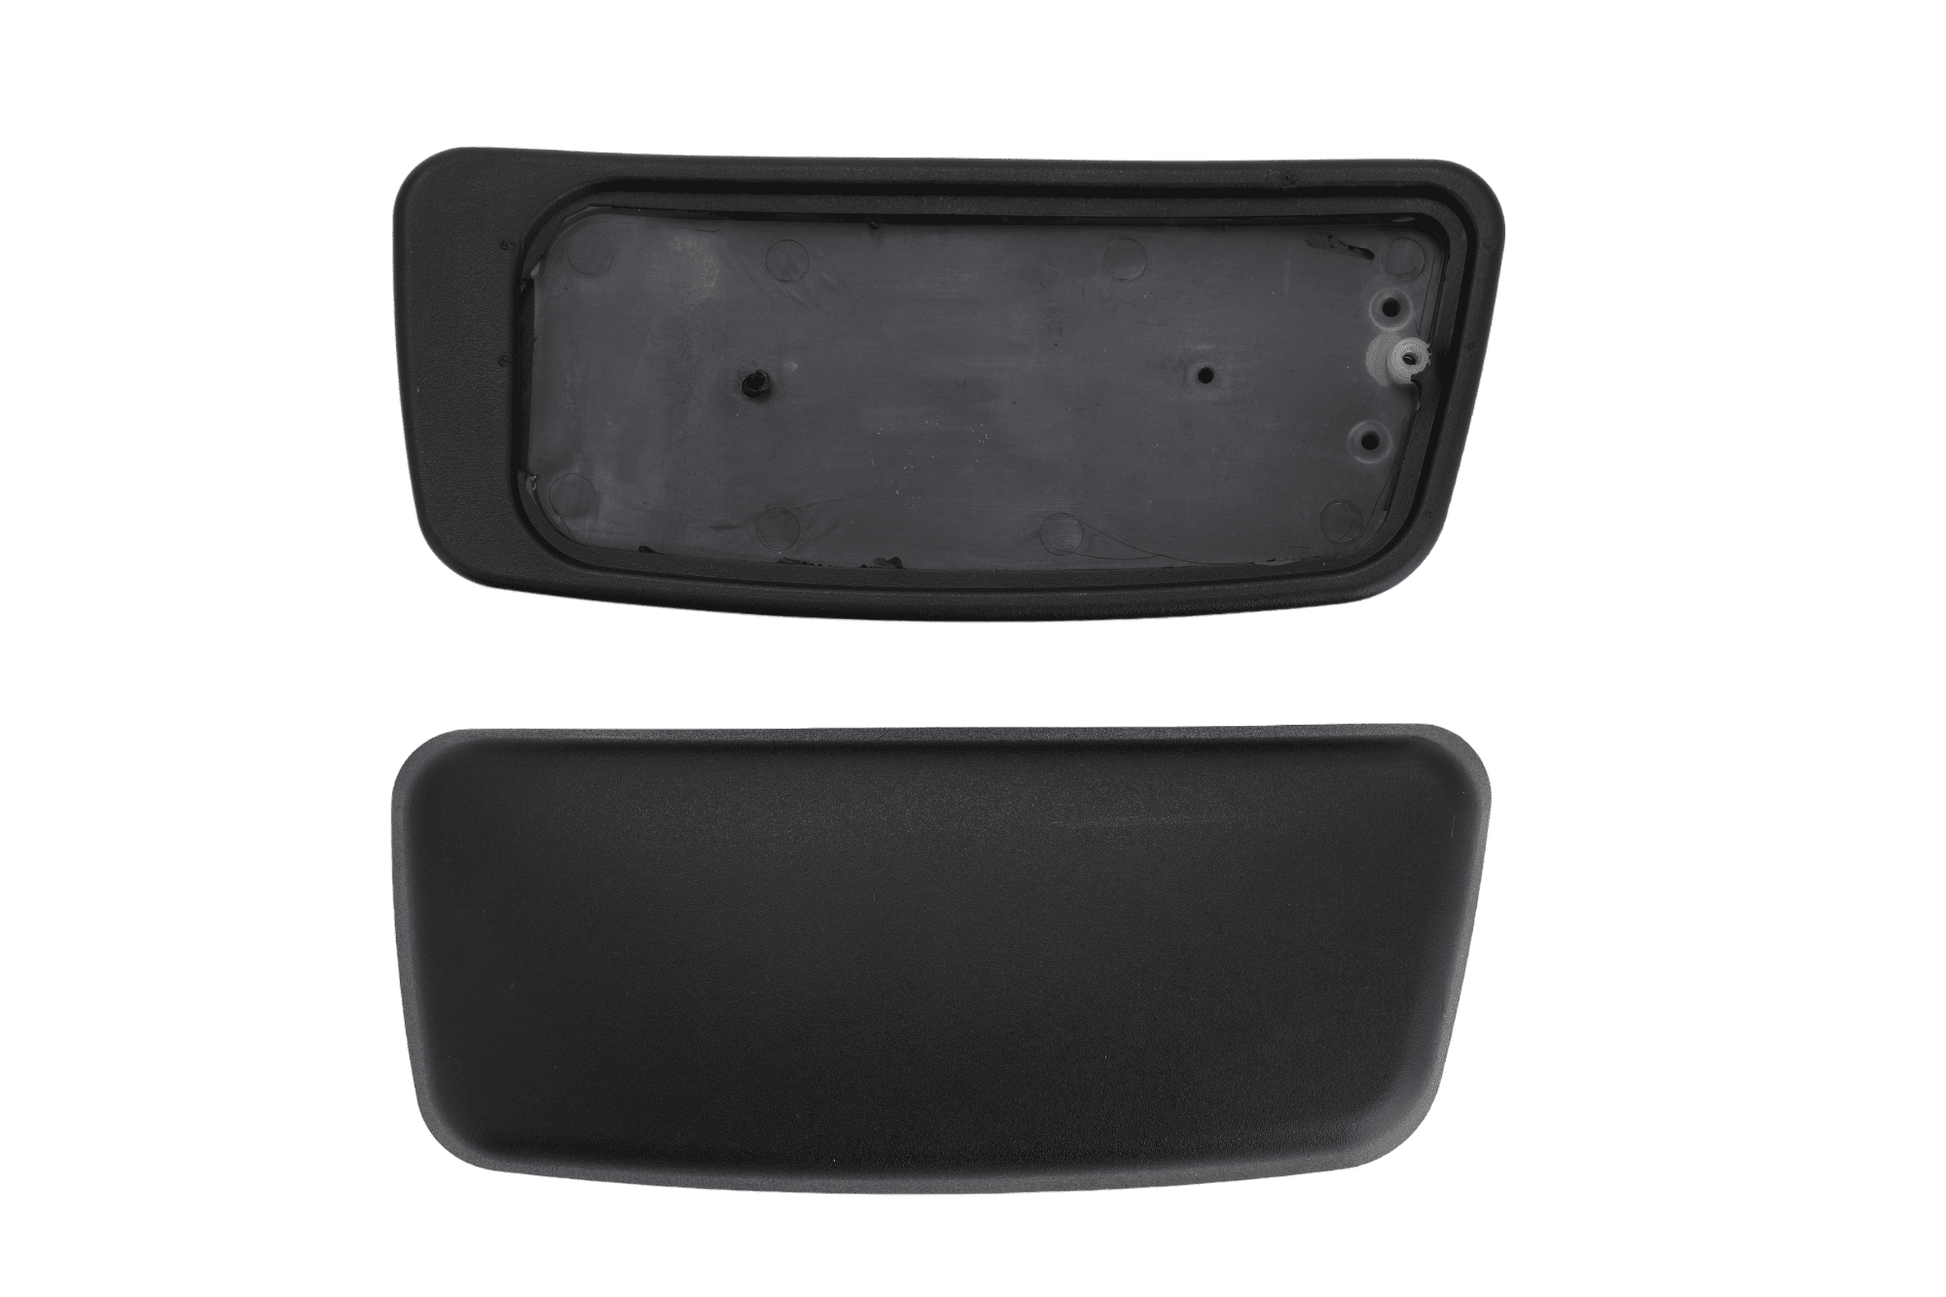 Replacement Arm Pad For Haworth Zody - chairorama